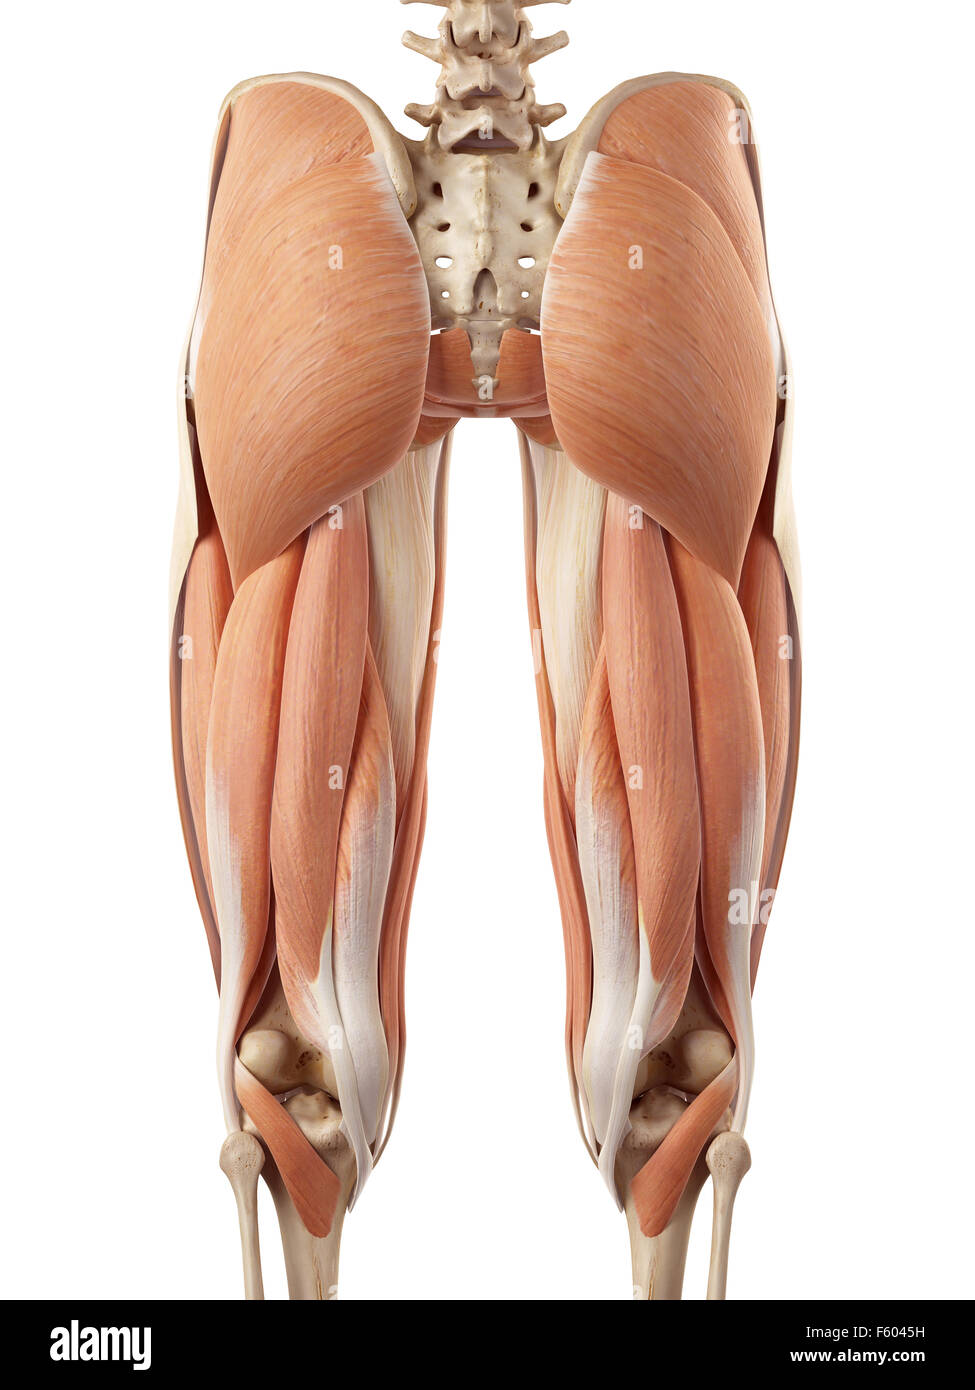 medical accurate illustration of the upper leg muscles Stock Photo